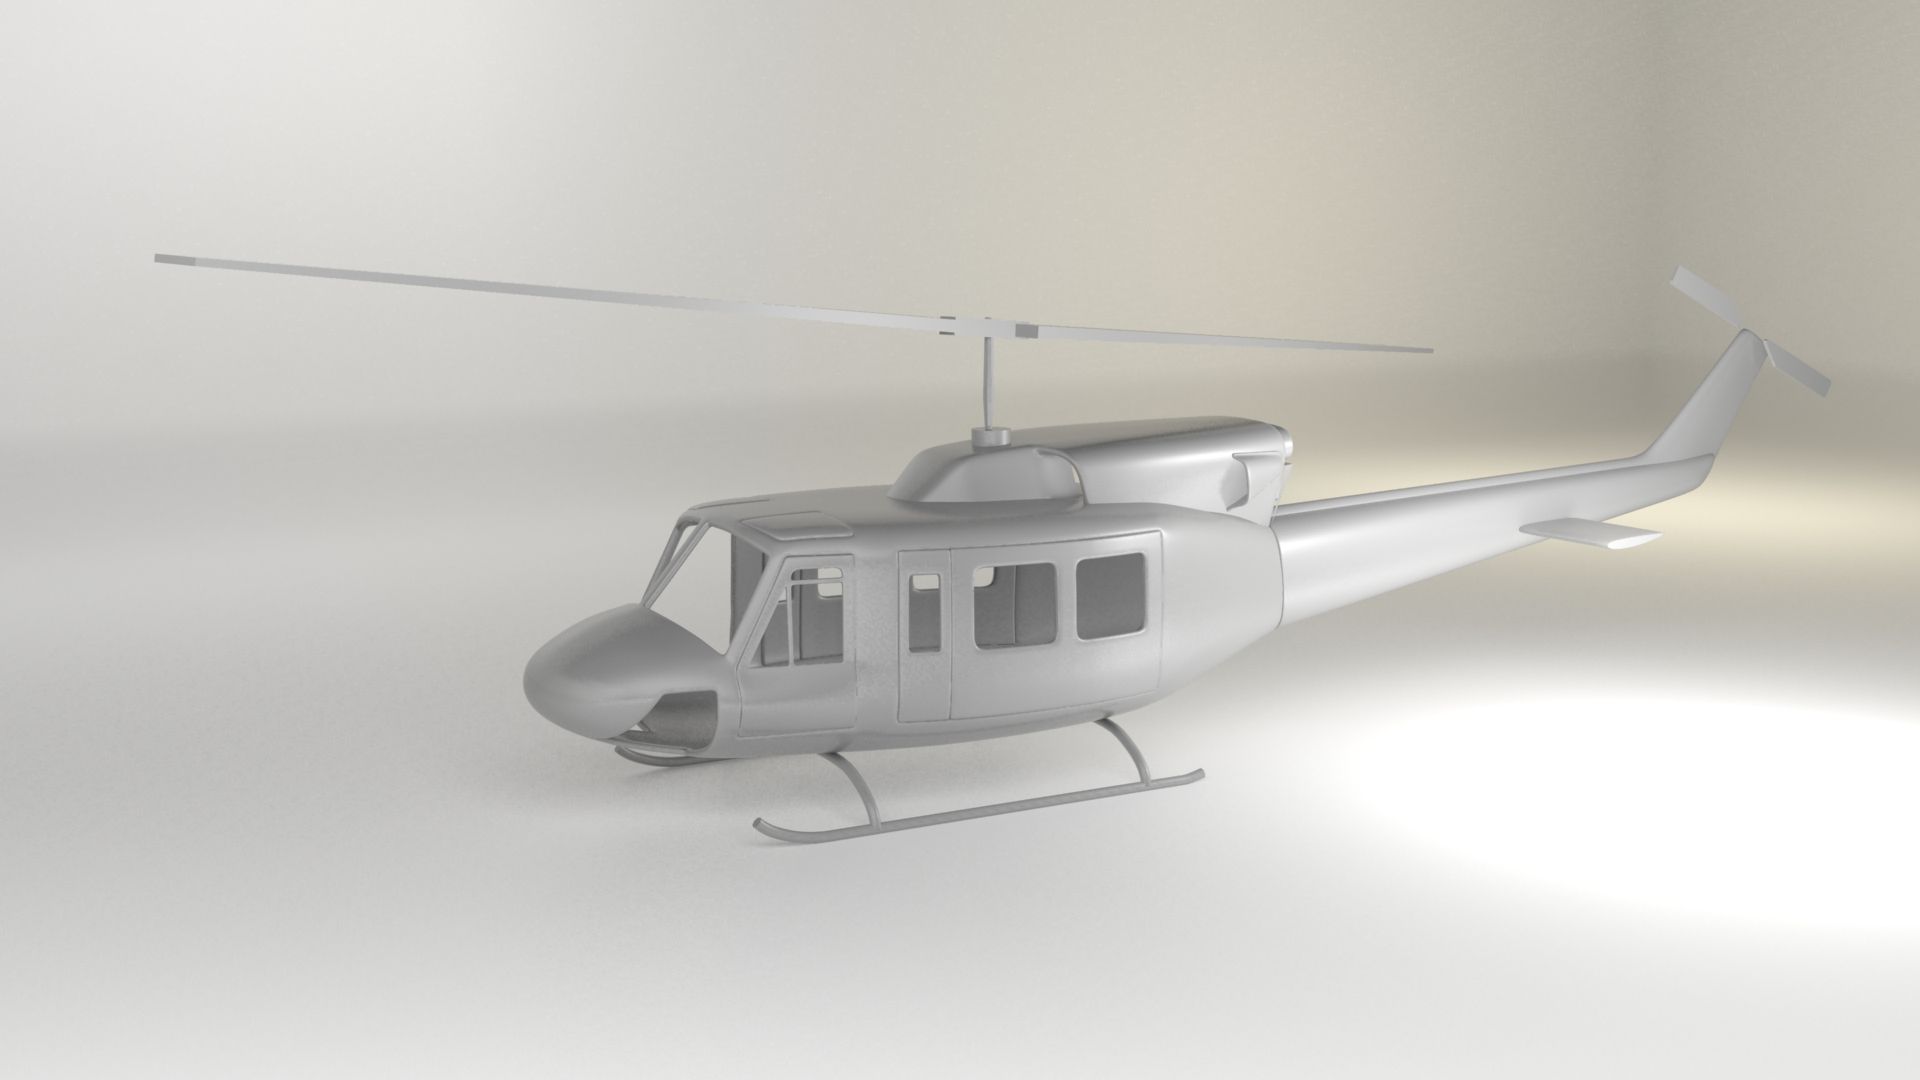 Making A 3D Model Of The UH 1N Twin Huey Helicopter And Am Confused About The Internal Differences Of All The UH 1 Variants. Would Love Some Help!: Helicopters